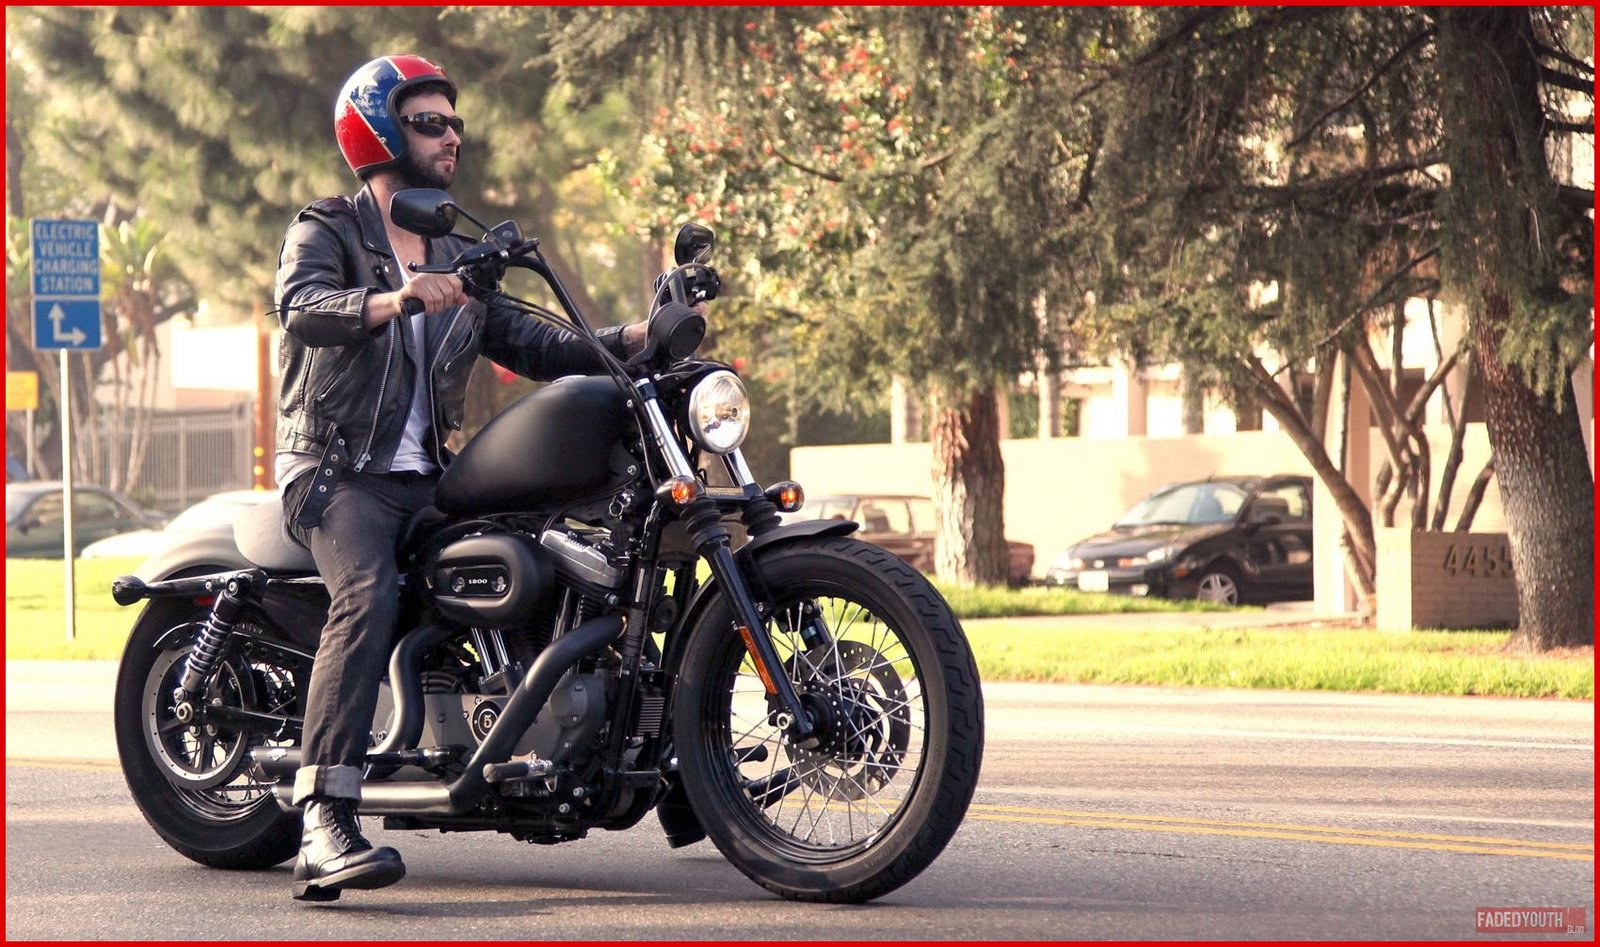 Picture of adam levine on motorcycle